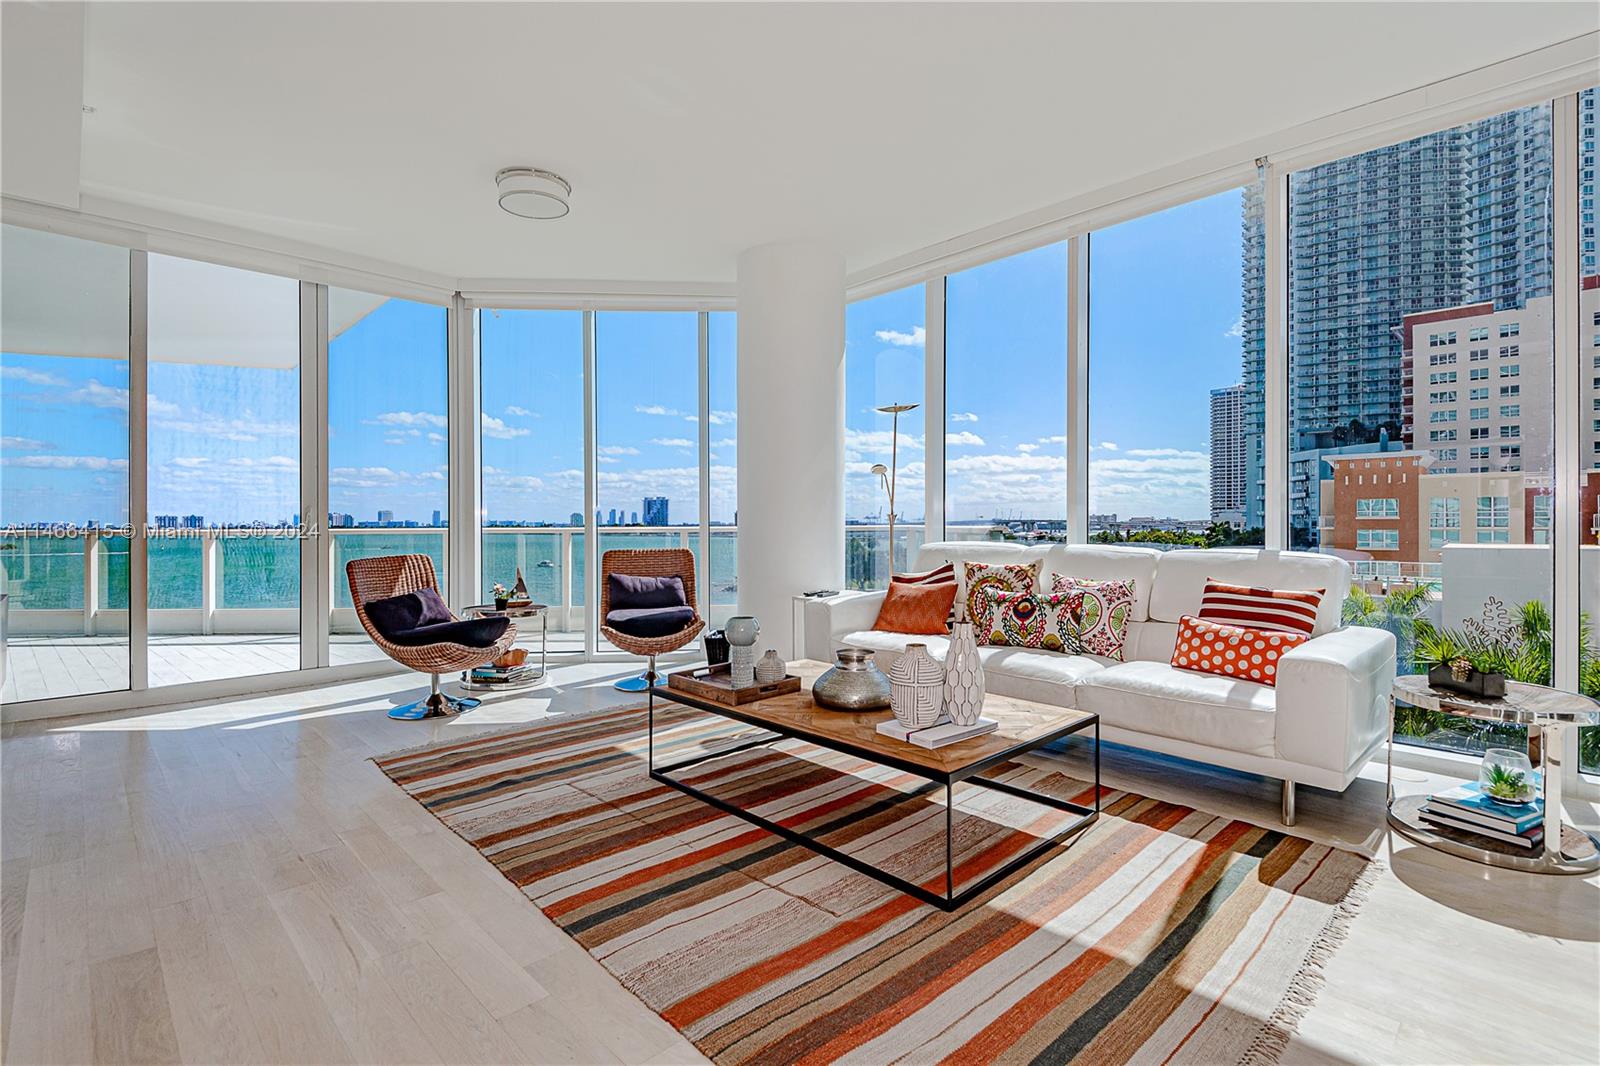 Beautiful 3 bedroom/3.5 bathroom unit with the best view that Biscayne Bay, 3 balconies, two direct elevators opening directly into the unit, solid wood floors and top of the line appliances. Amenities include: gym, spa, concierge, 2 pools with towel service and much more. AS IS